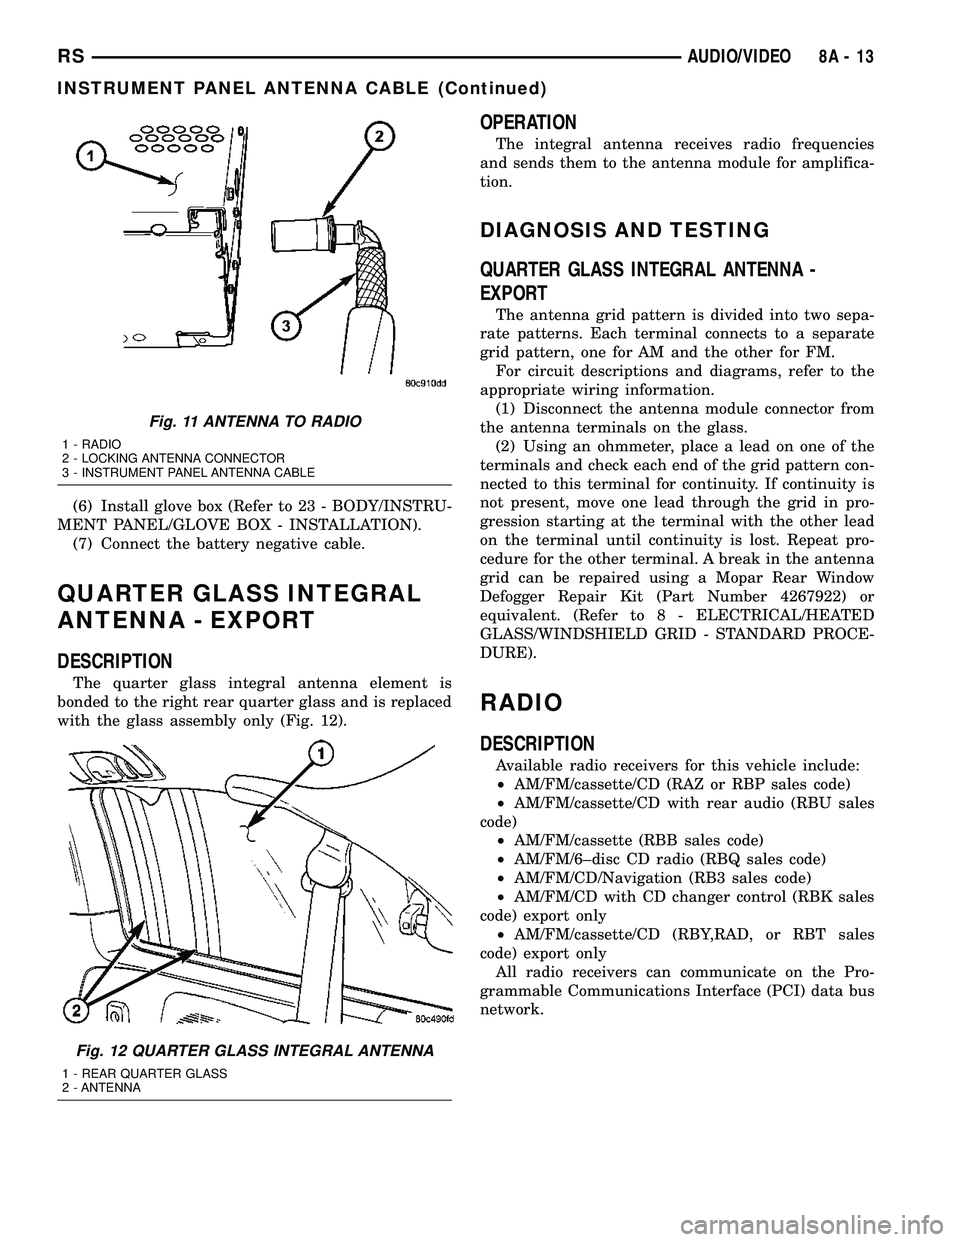 CHRYSLER VOYAGER 2005  Service Manual (6) Install glove box (Refer to 23 - BODY/INSTRU-
MENT PANEL/GLOVE BOX - INSTALLATION).
(7) Connect the battery negative cable.
QUARTER GLASS INTEGRAL
ANTENNA - EXPORT
DESCRIPTION
The quarter glass in